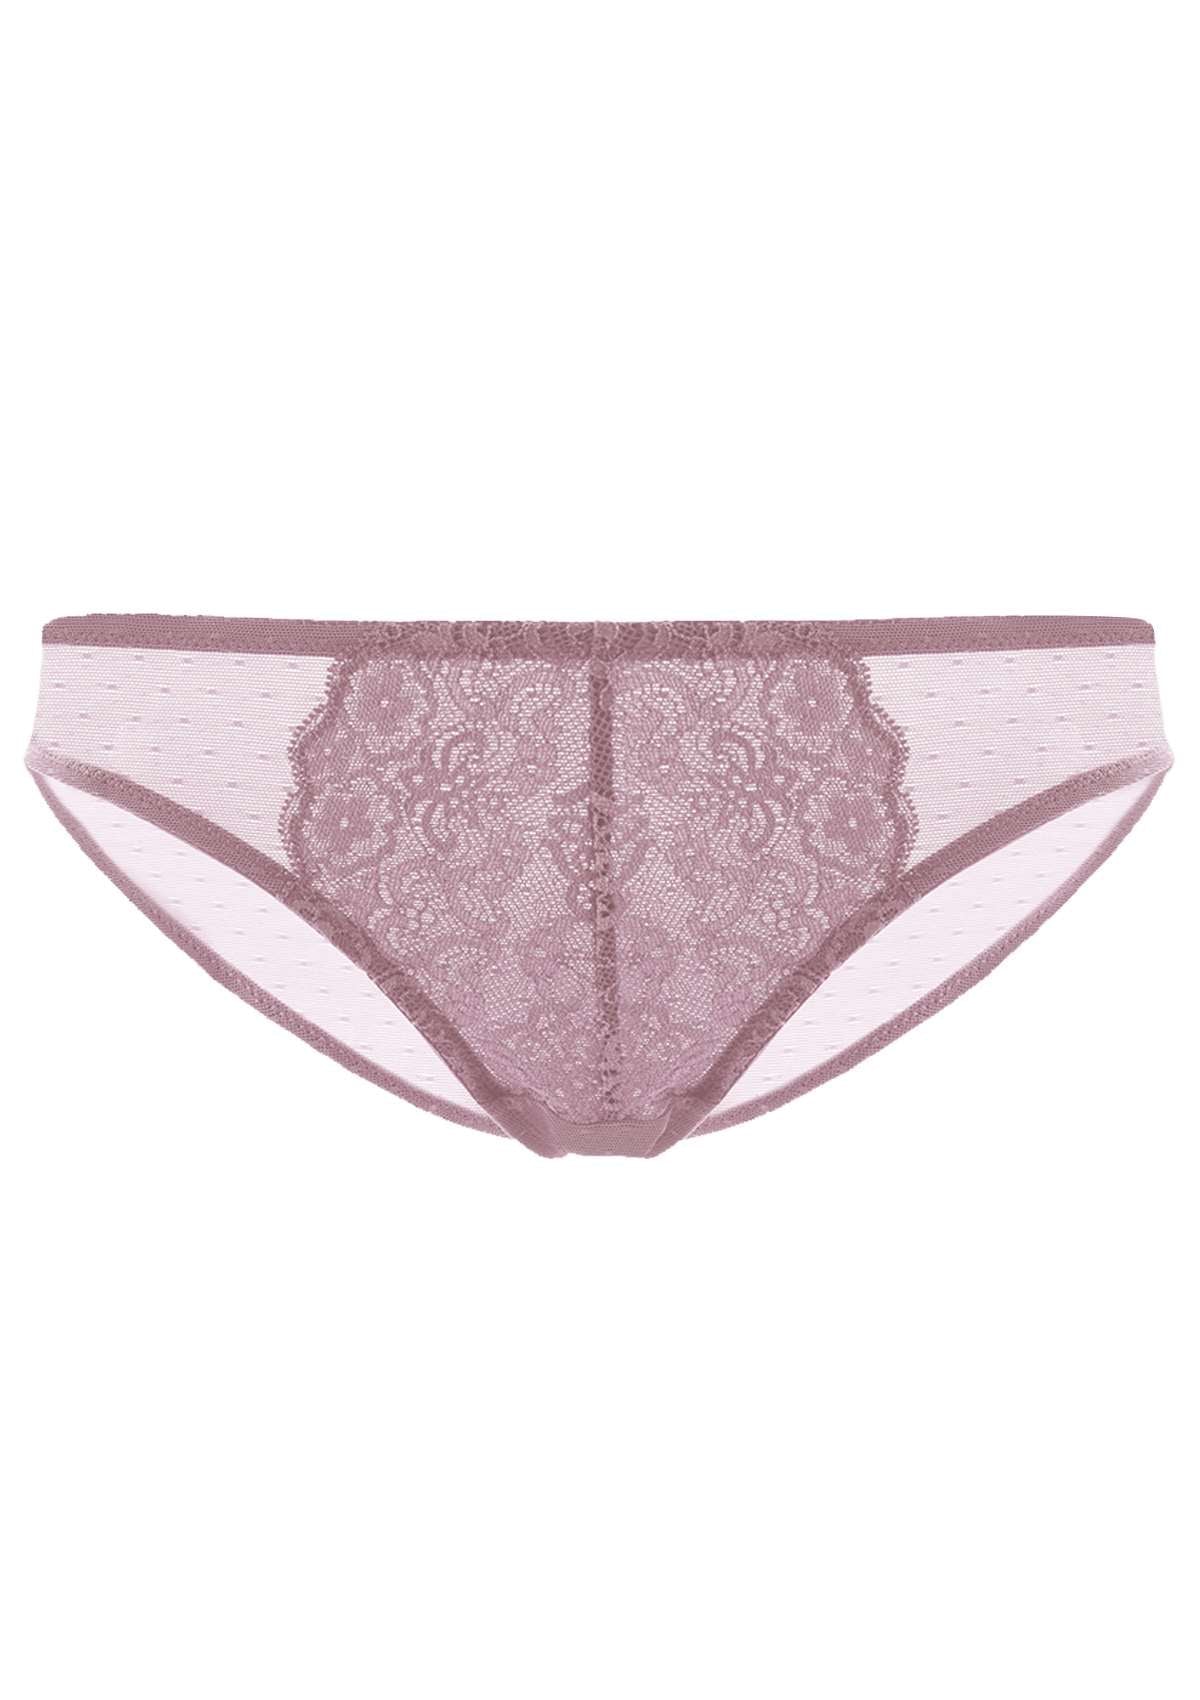 HSIA Nymphaea Front Floral Lace Mesh Back Comfort Bikini Underwear - S / Pink